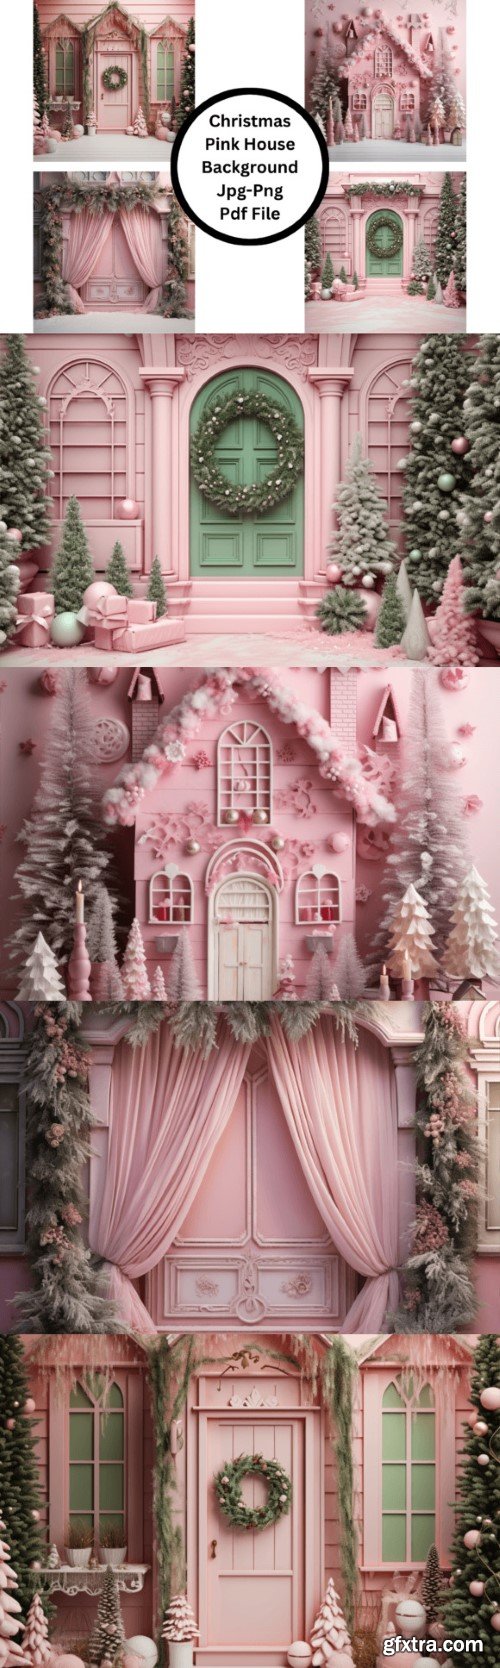 Christmas Pink House Background